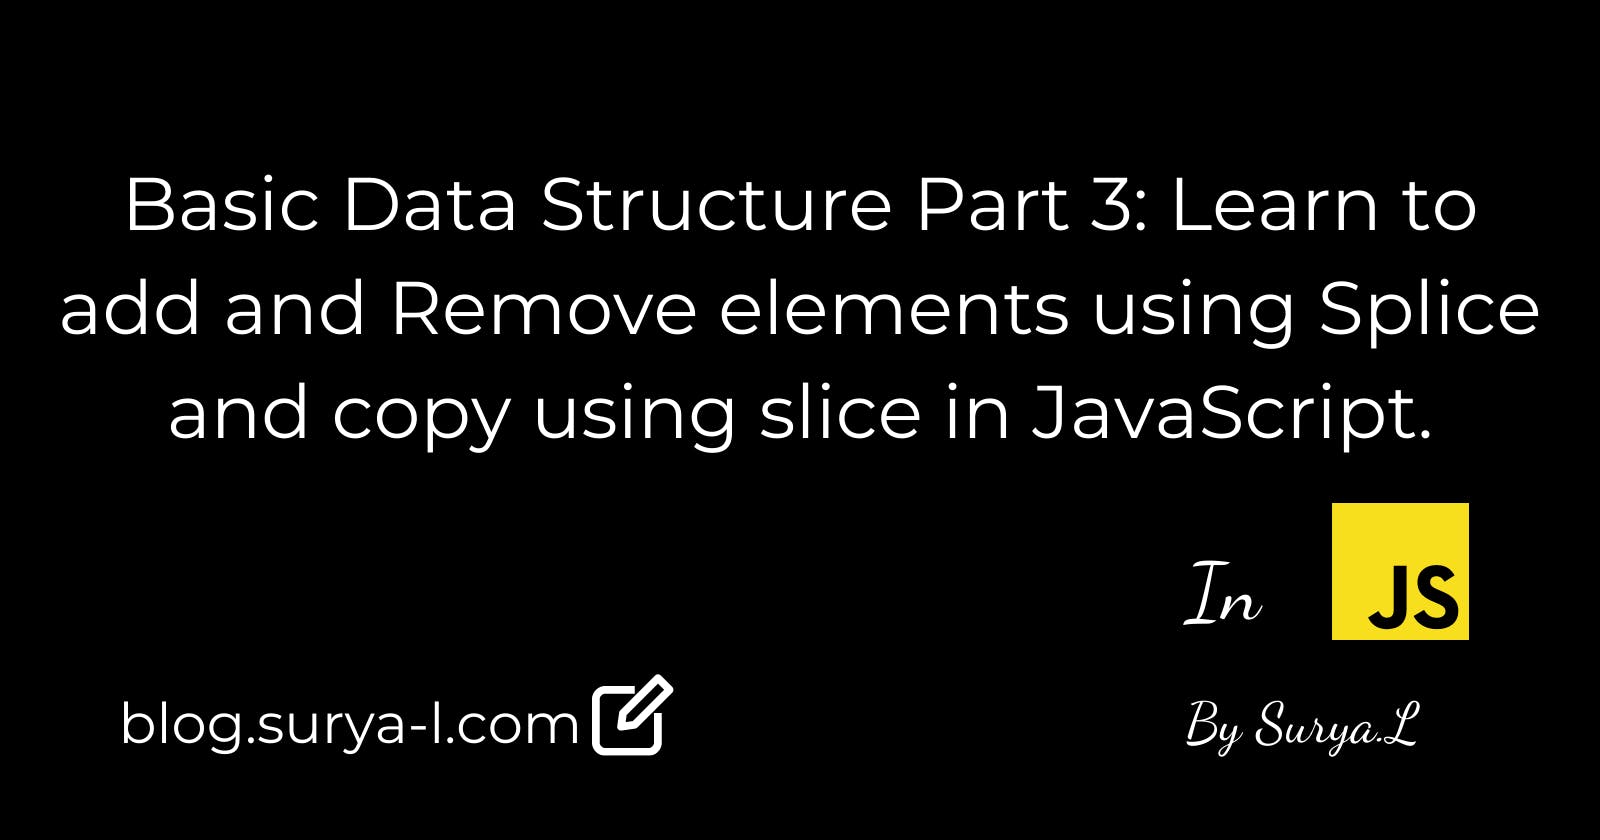 Basic Data Structure Part 3: Learn to add and Remove elements using Splice and copy using slice in JavaScript.